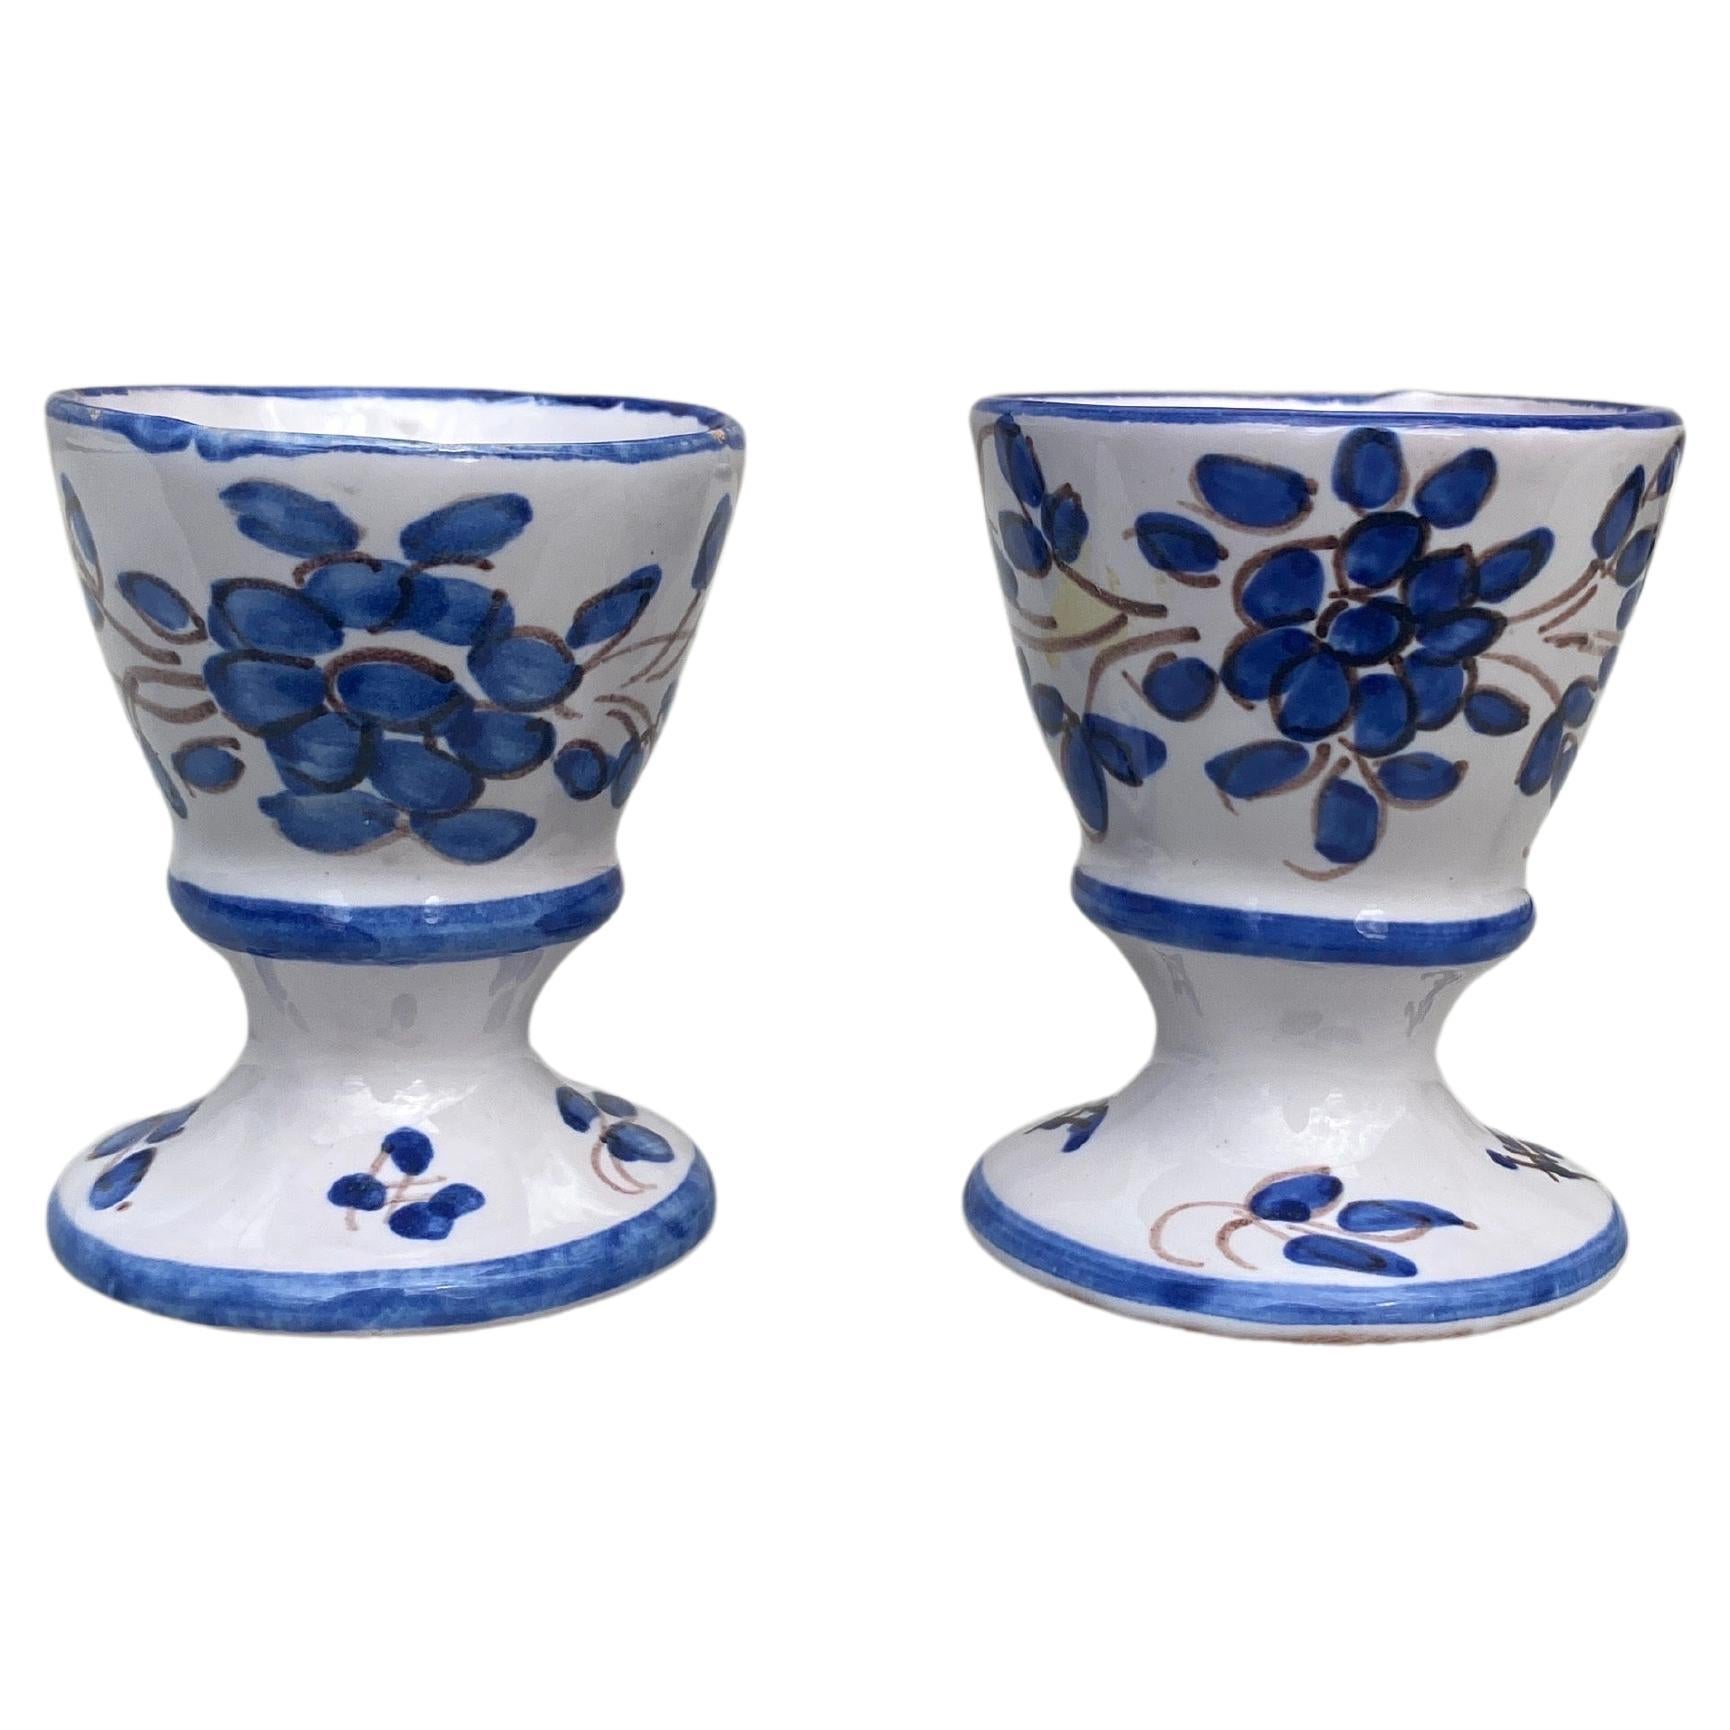 Pair of Blue & White Faience Egg Cups Martres Tolosane